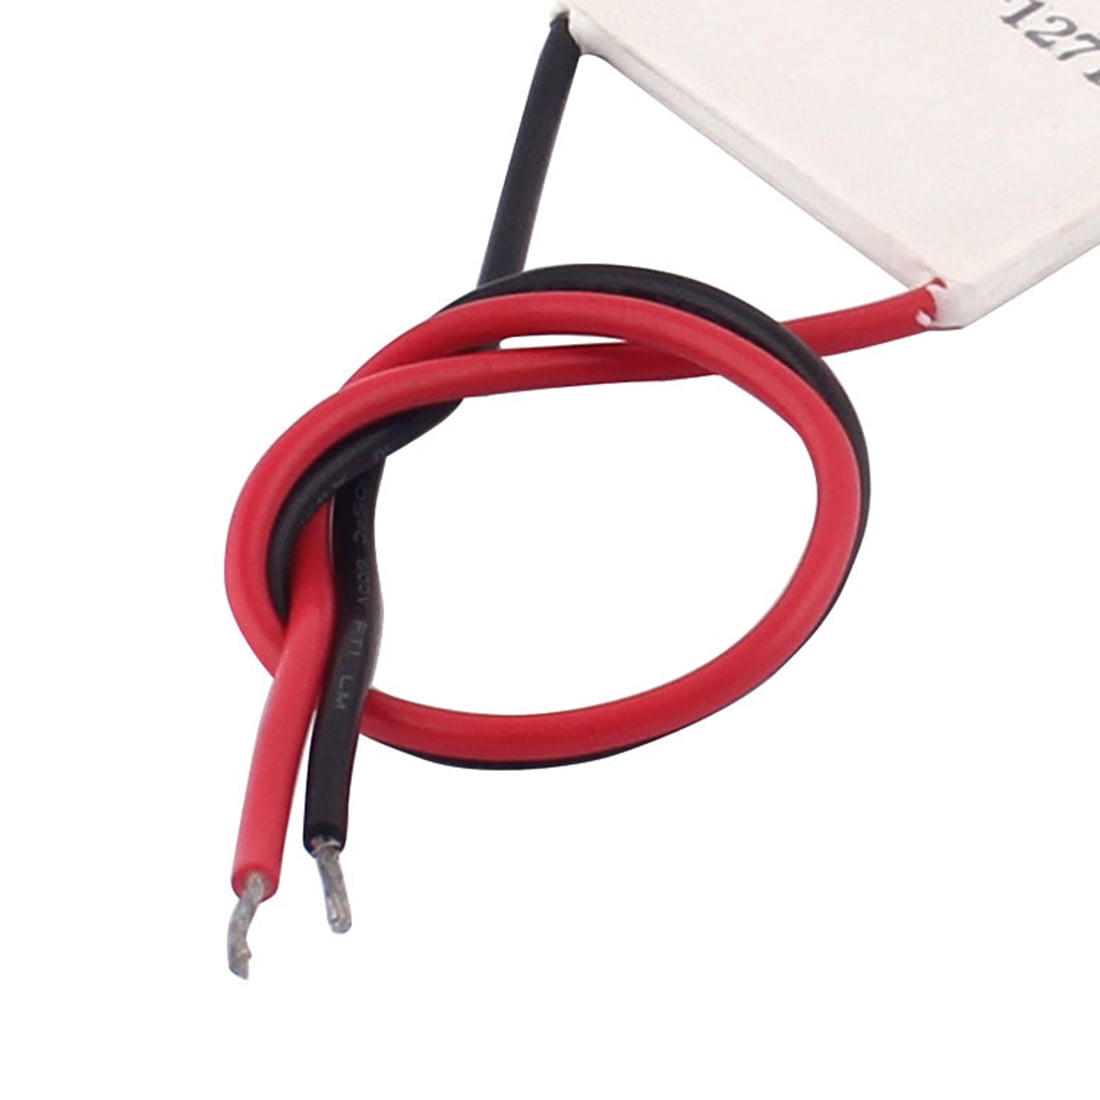 TEC1-12715 11.8A 12V 142W 40x40x3.5mm Thermoelectric Cooler